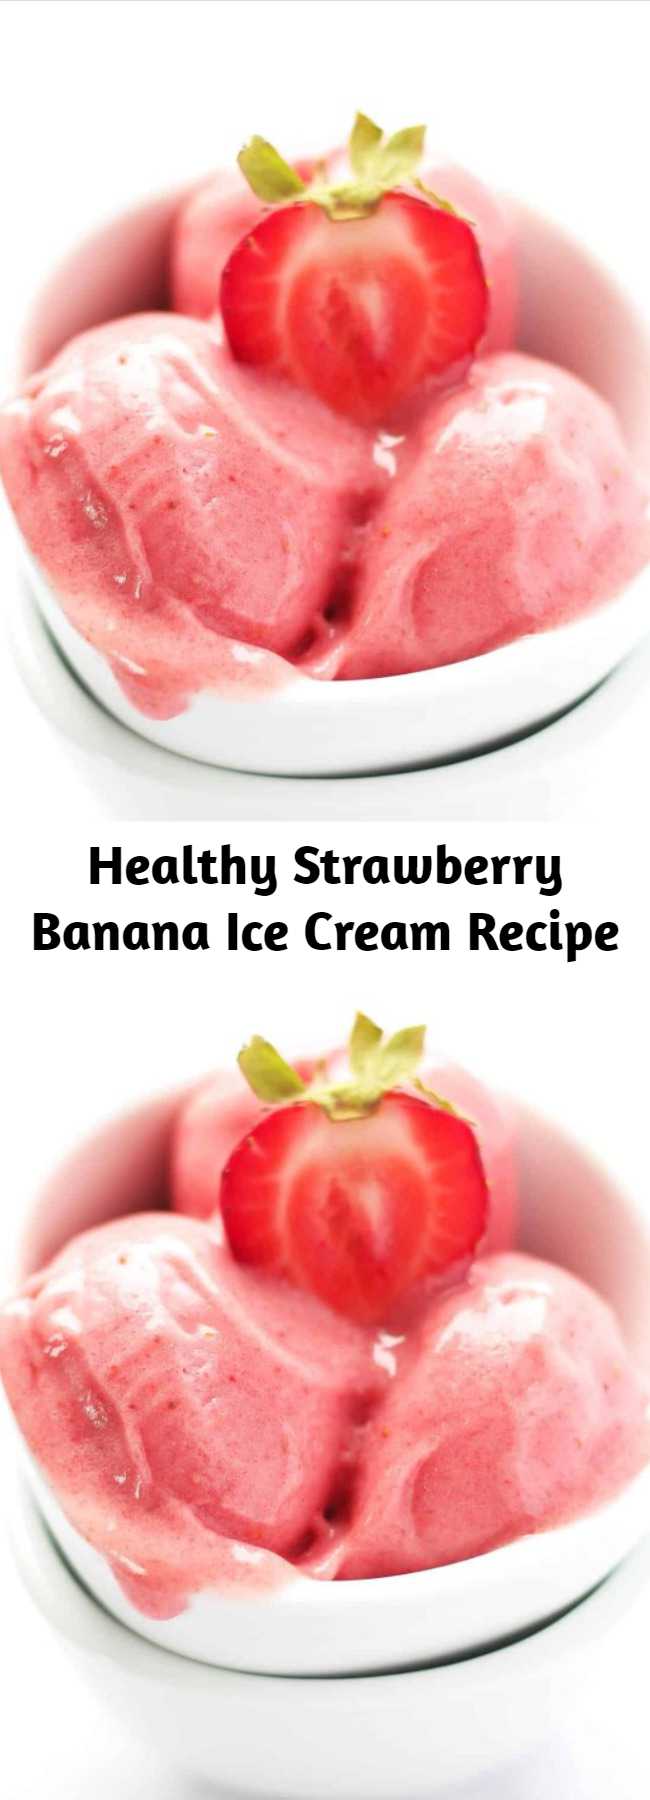 Healthy Strawberry Banana Ice Cream Recipe - If you are looking for a healthy frozen treat, you HAVE to learn how to make this simple 2 ingredient Strawberry Banana Ice Cream at home. It is clean eating, dairy free, vegan, paleo and requires no added sugar. Kids love this homemade strawberry ice cream and it is a great recipe to get them involved in the process. #icecream #summer #dessert #healthy #vegan